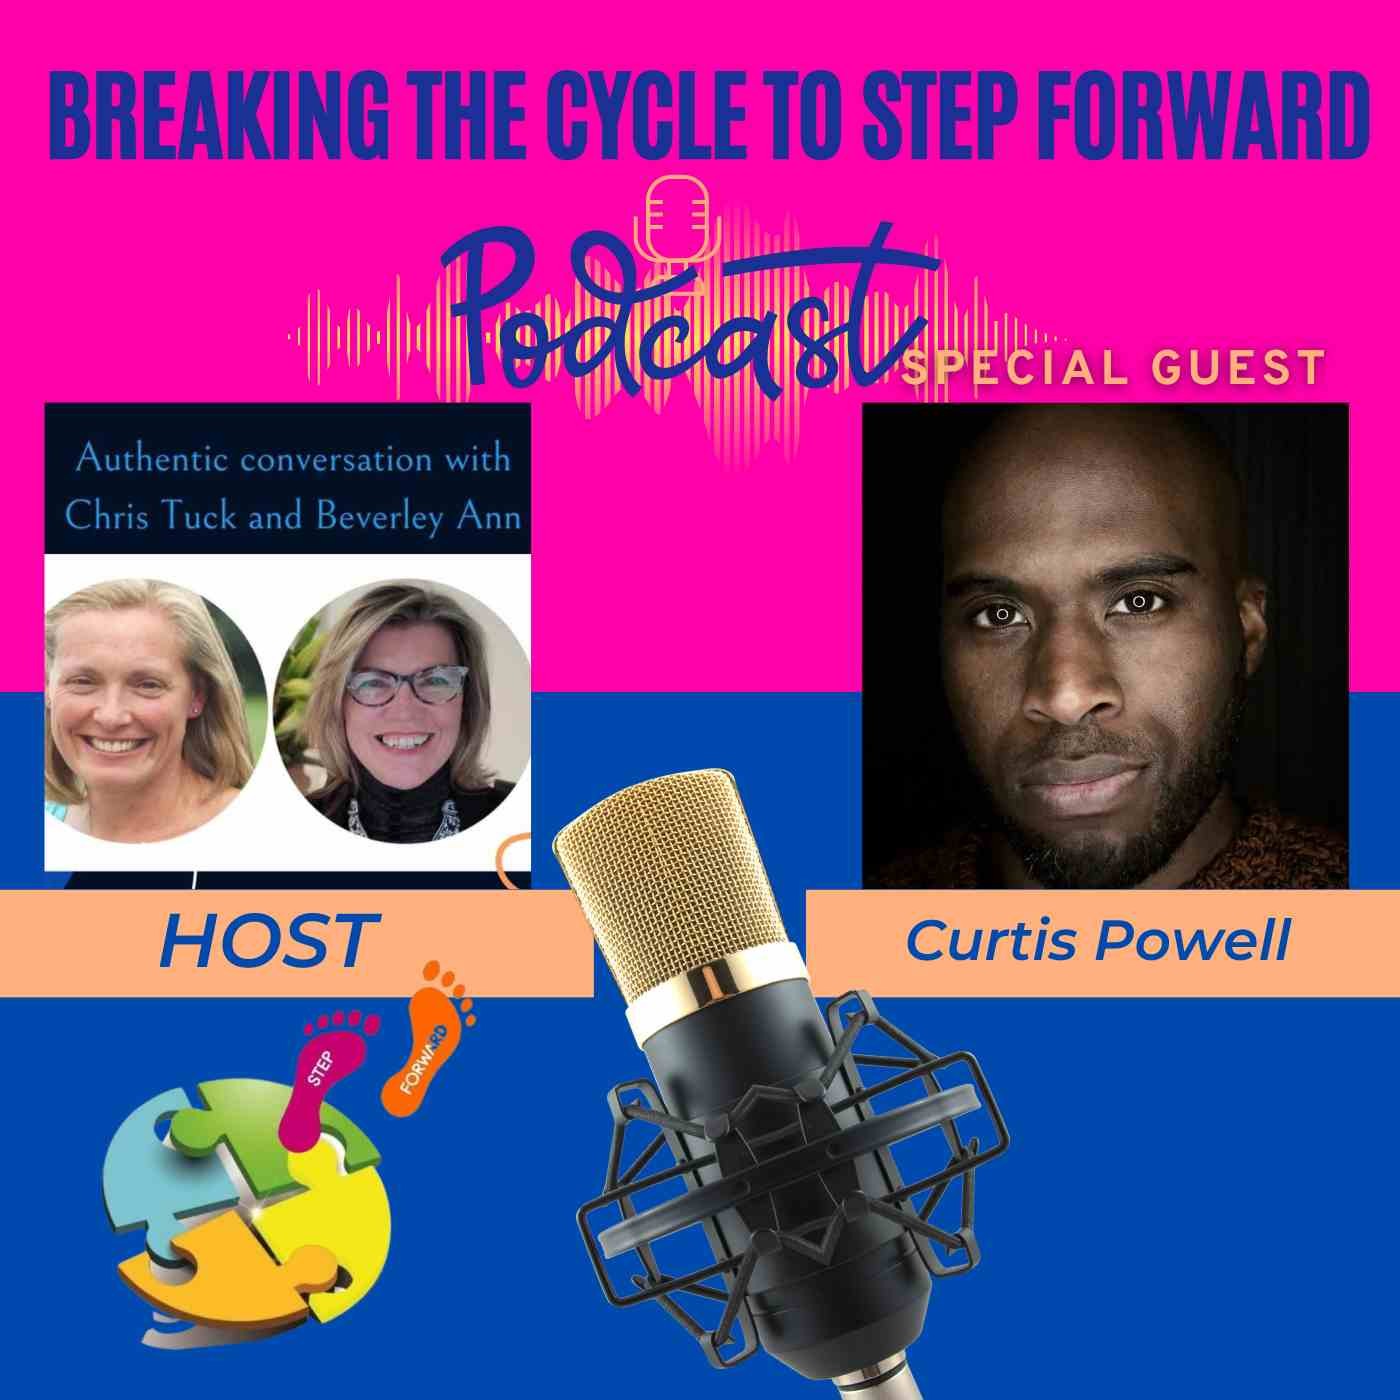 Special Guest: Curtis Powell